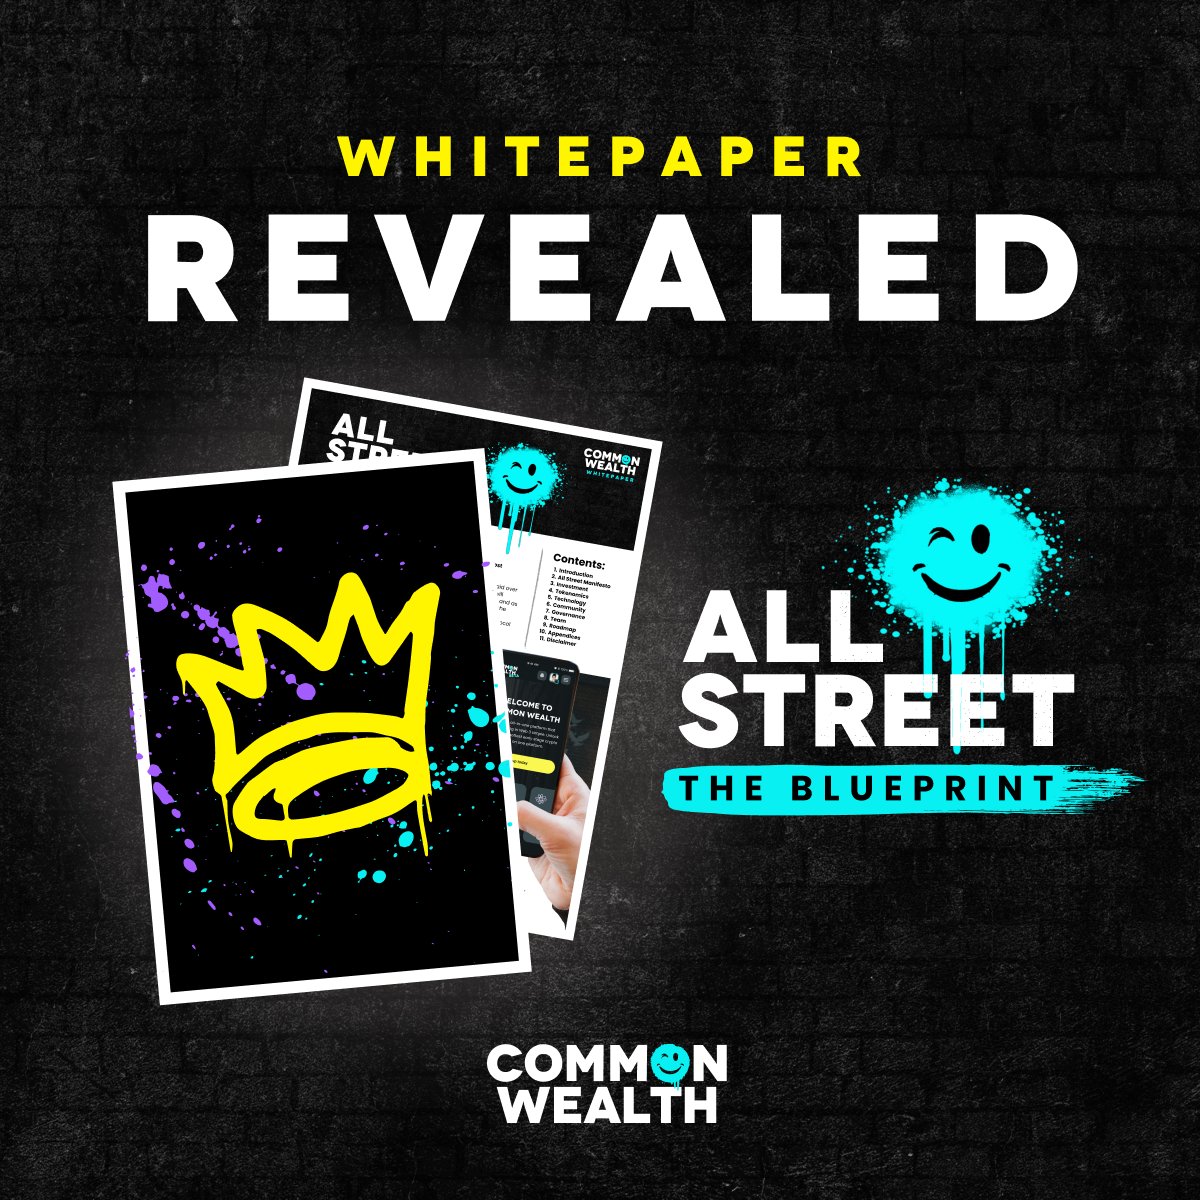 🚨COMPETITION TIME! To celebrate the launch of Common Wealth's Whitepaper, All Street: The Blueprint, we’ve got something exciting for you! $500 guaranteed $WLTH allocation up for grabs from our friends at @paid_network How to enter: 1. Like this post 2. Repost 3. Tag 3…